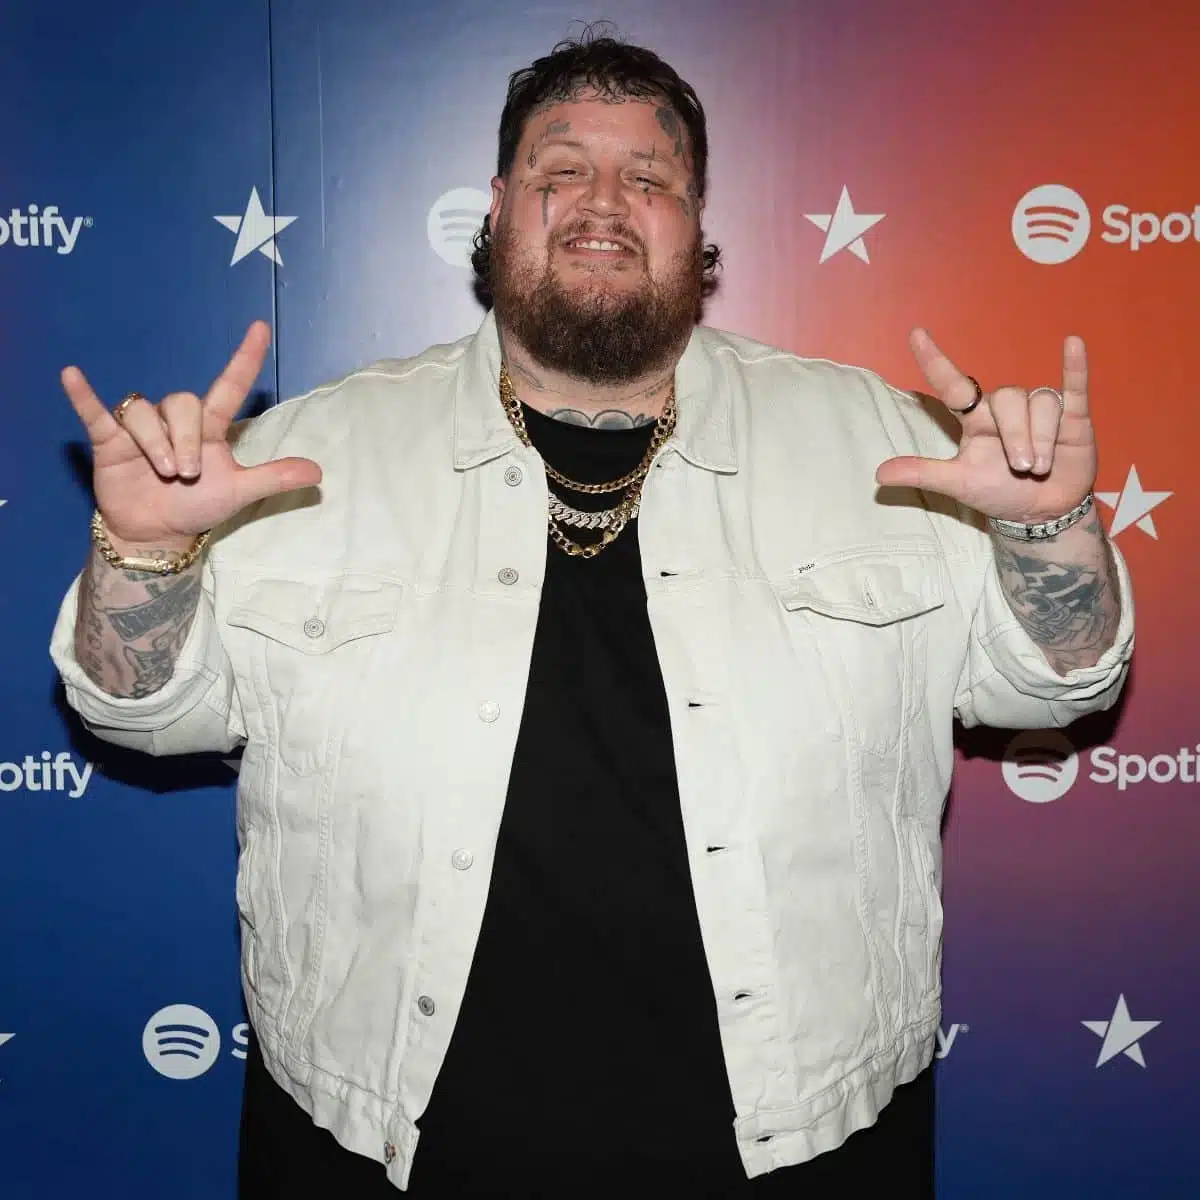 how tall is jelly roll the rapper